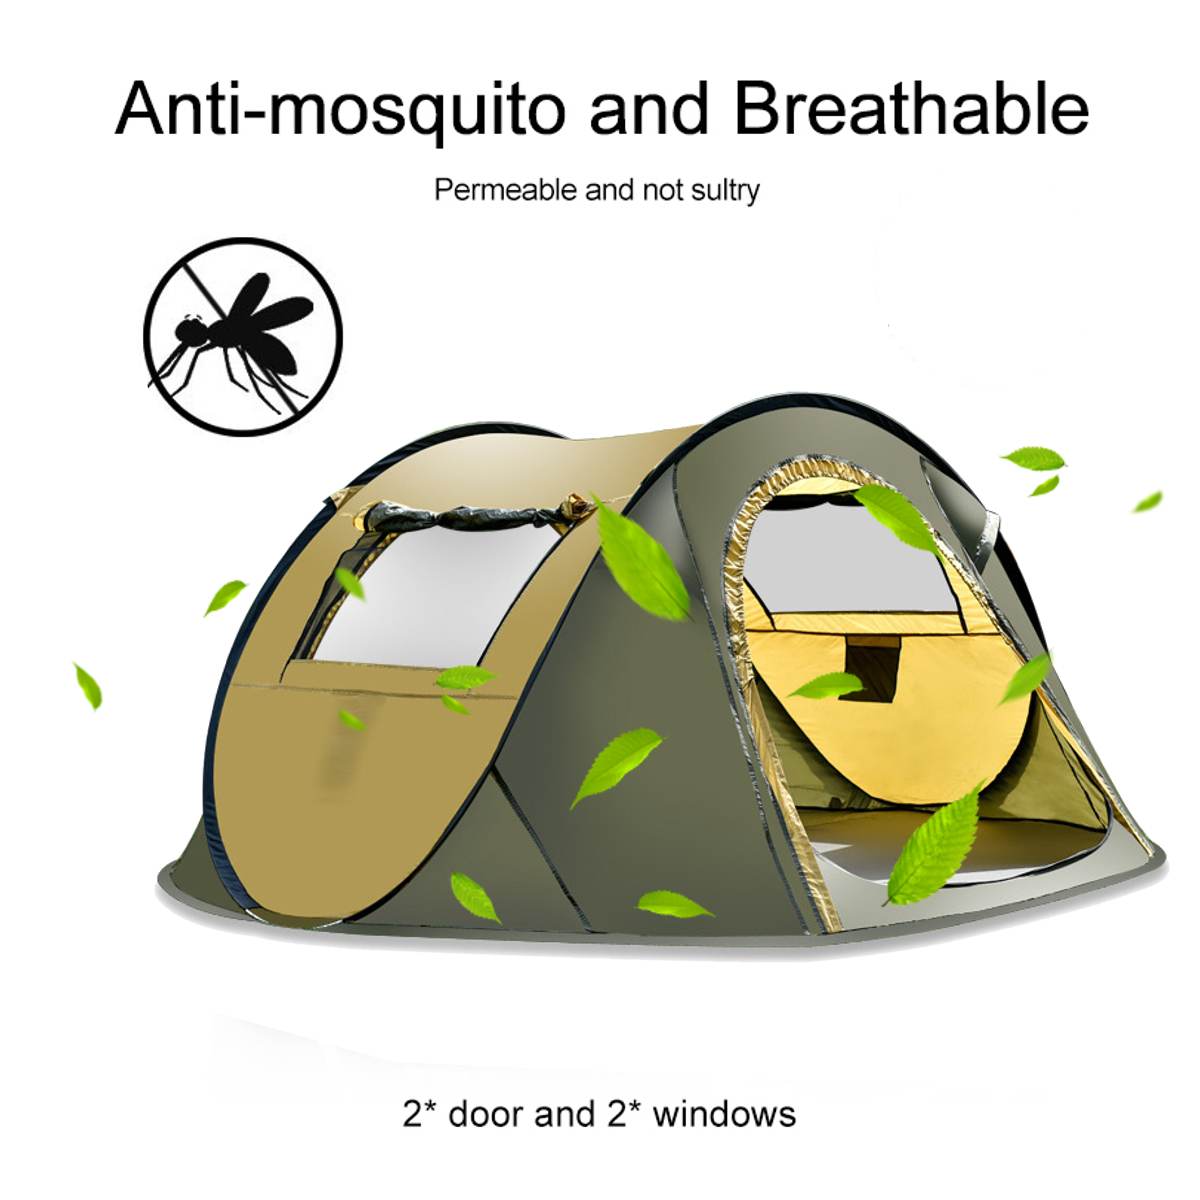 Goat 5-8 People Automatic amily Hiking Pop Up Quick Shelter Outdoor Traveling Camping Tent